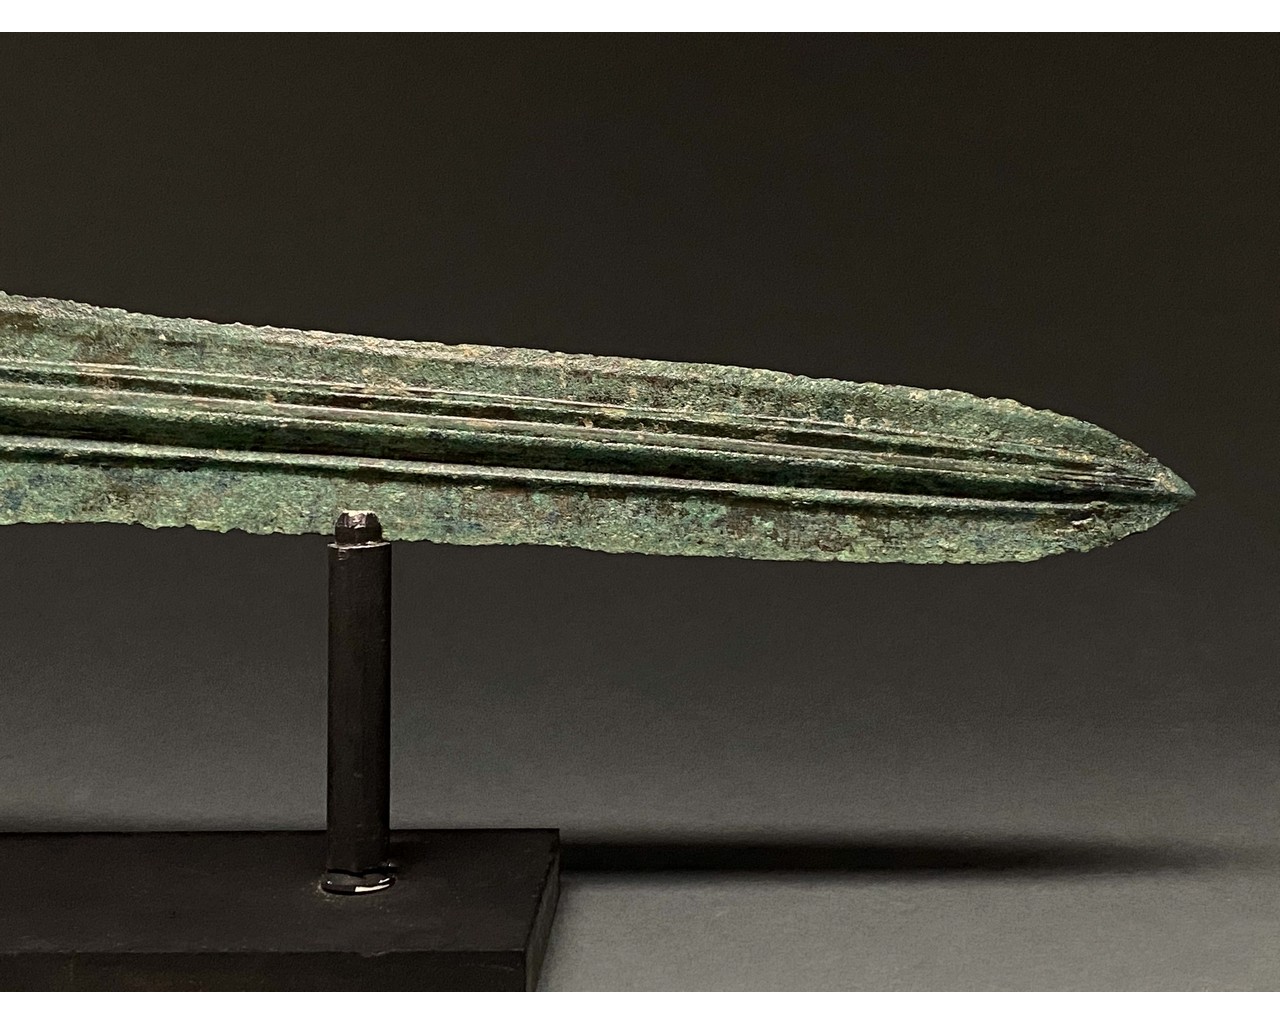 MAGNIFICENT ANCIENT BRONZE DECORATED SPEAR ON STAND - Image 4 of 7